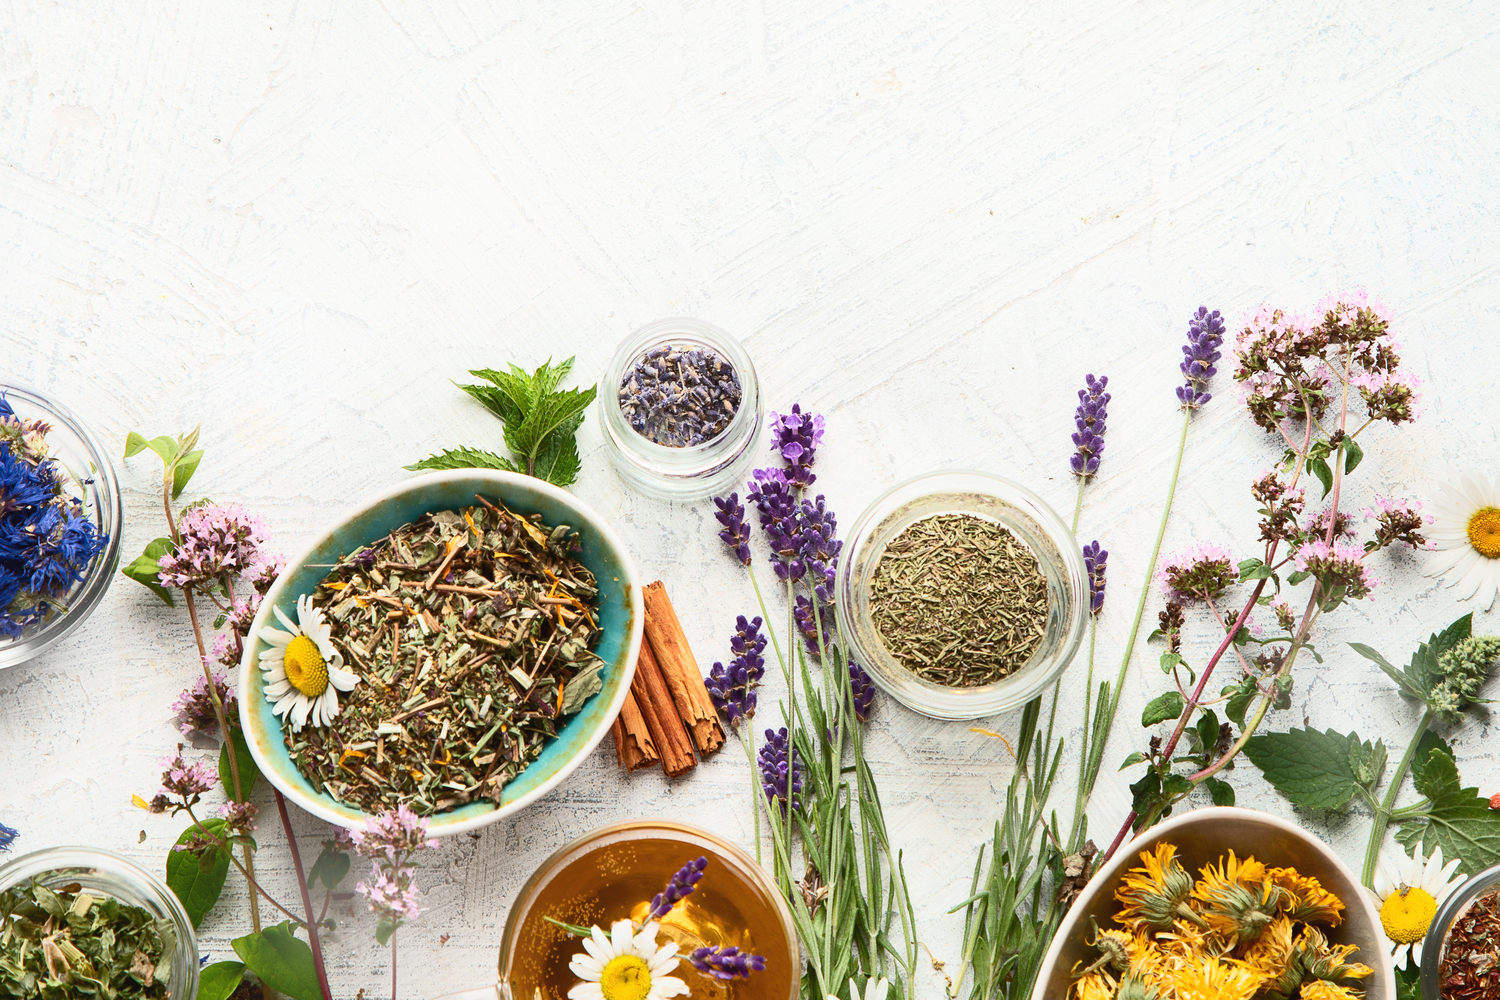 Herbalism and its benefits